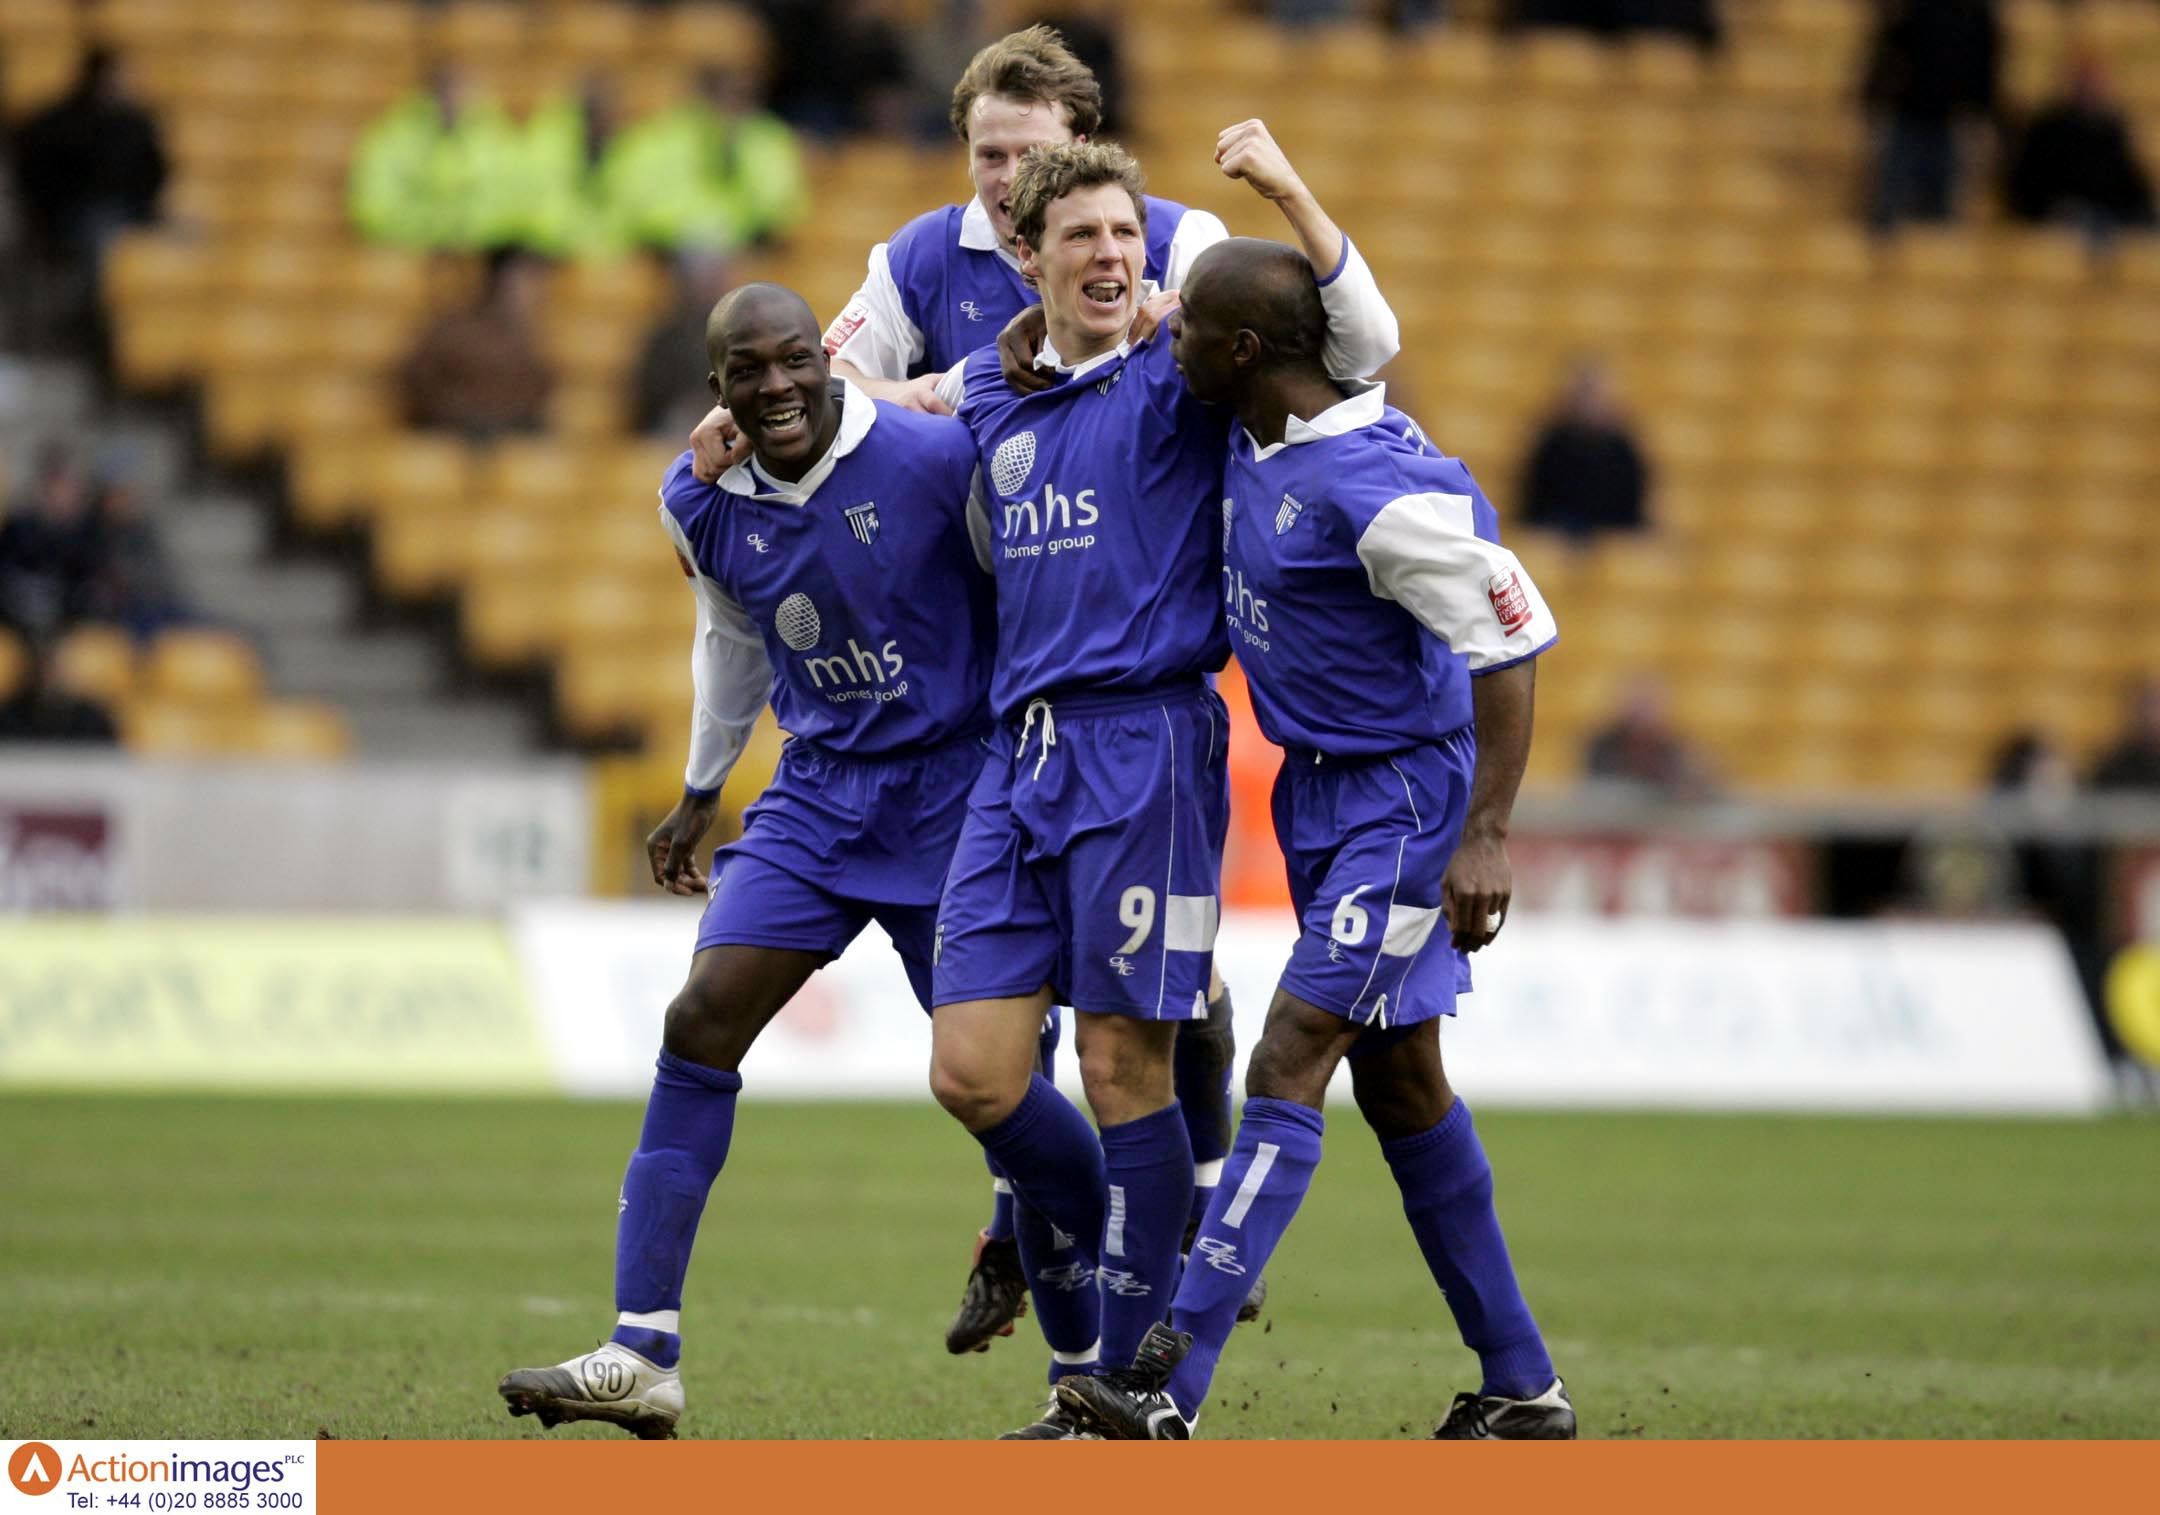 Football - Wolverhampton Wanderers v Gillingham Coca-Cola Football League Championship  - Molineux - 19/2/05 
Gillingham celebrate Darius Henderson scoring the first goal 
Mandatory Credit: Action Images / Keith Williams 
Livepic